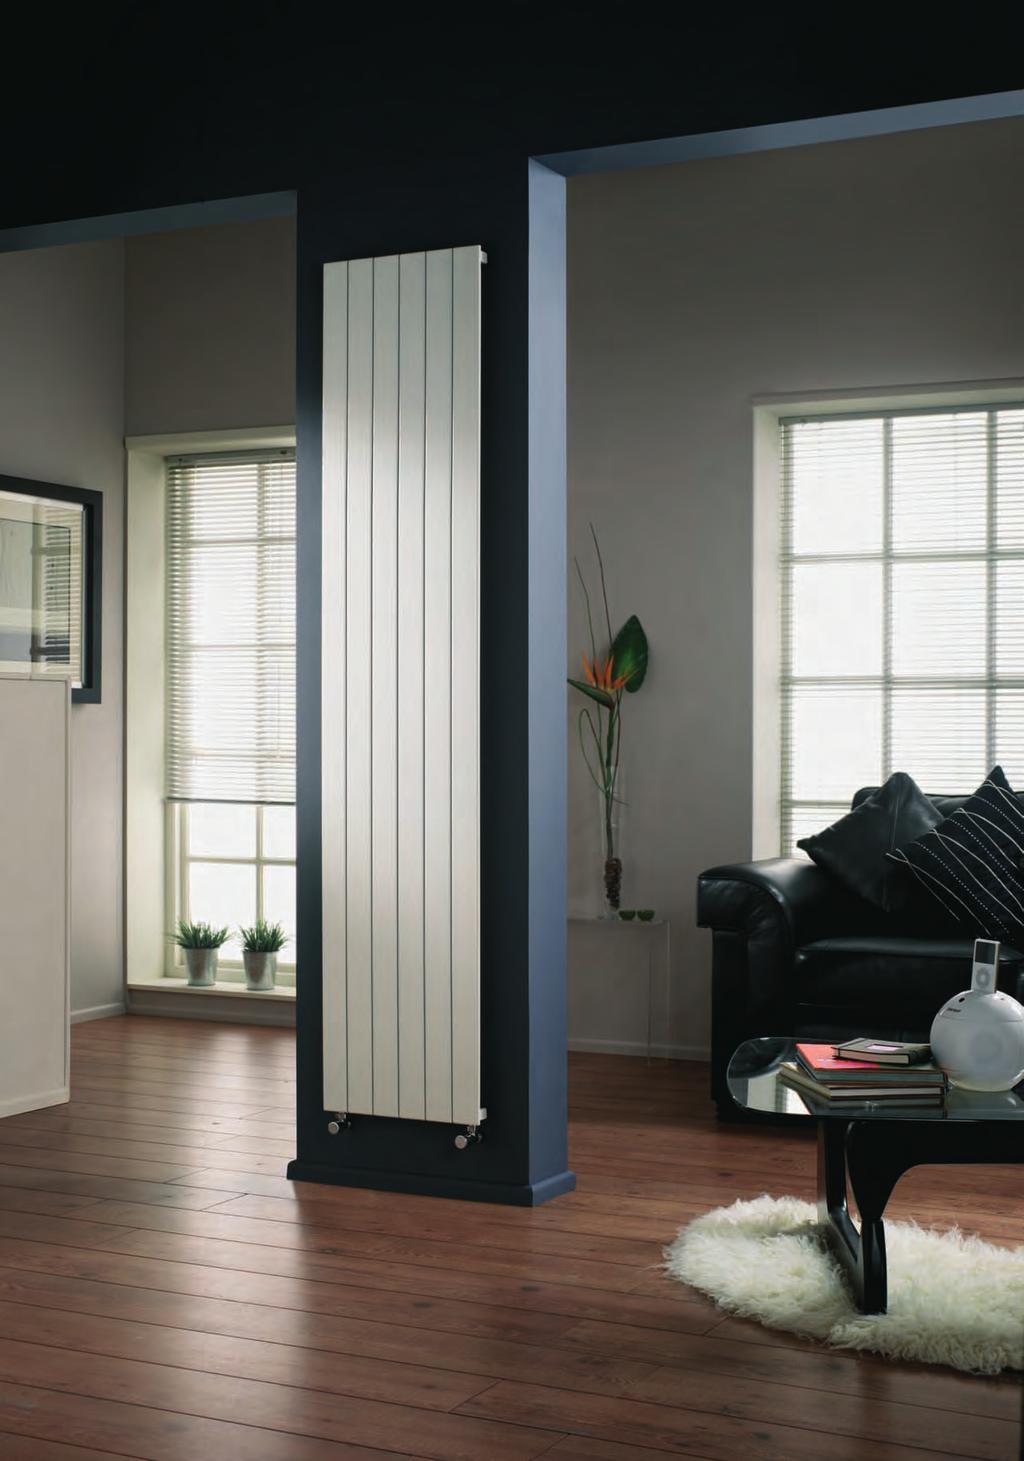 Feature Radiators Over the last few years the way we purchase radiators has changed dramatically.